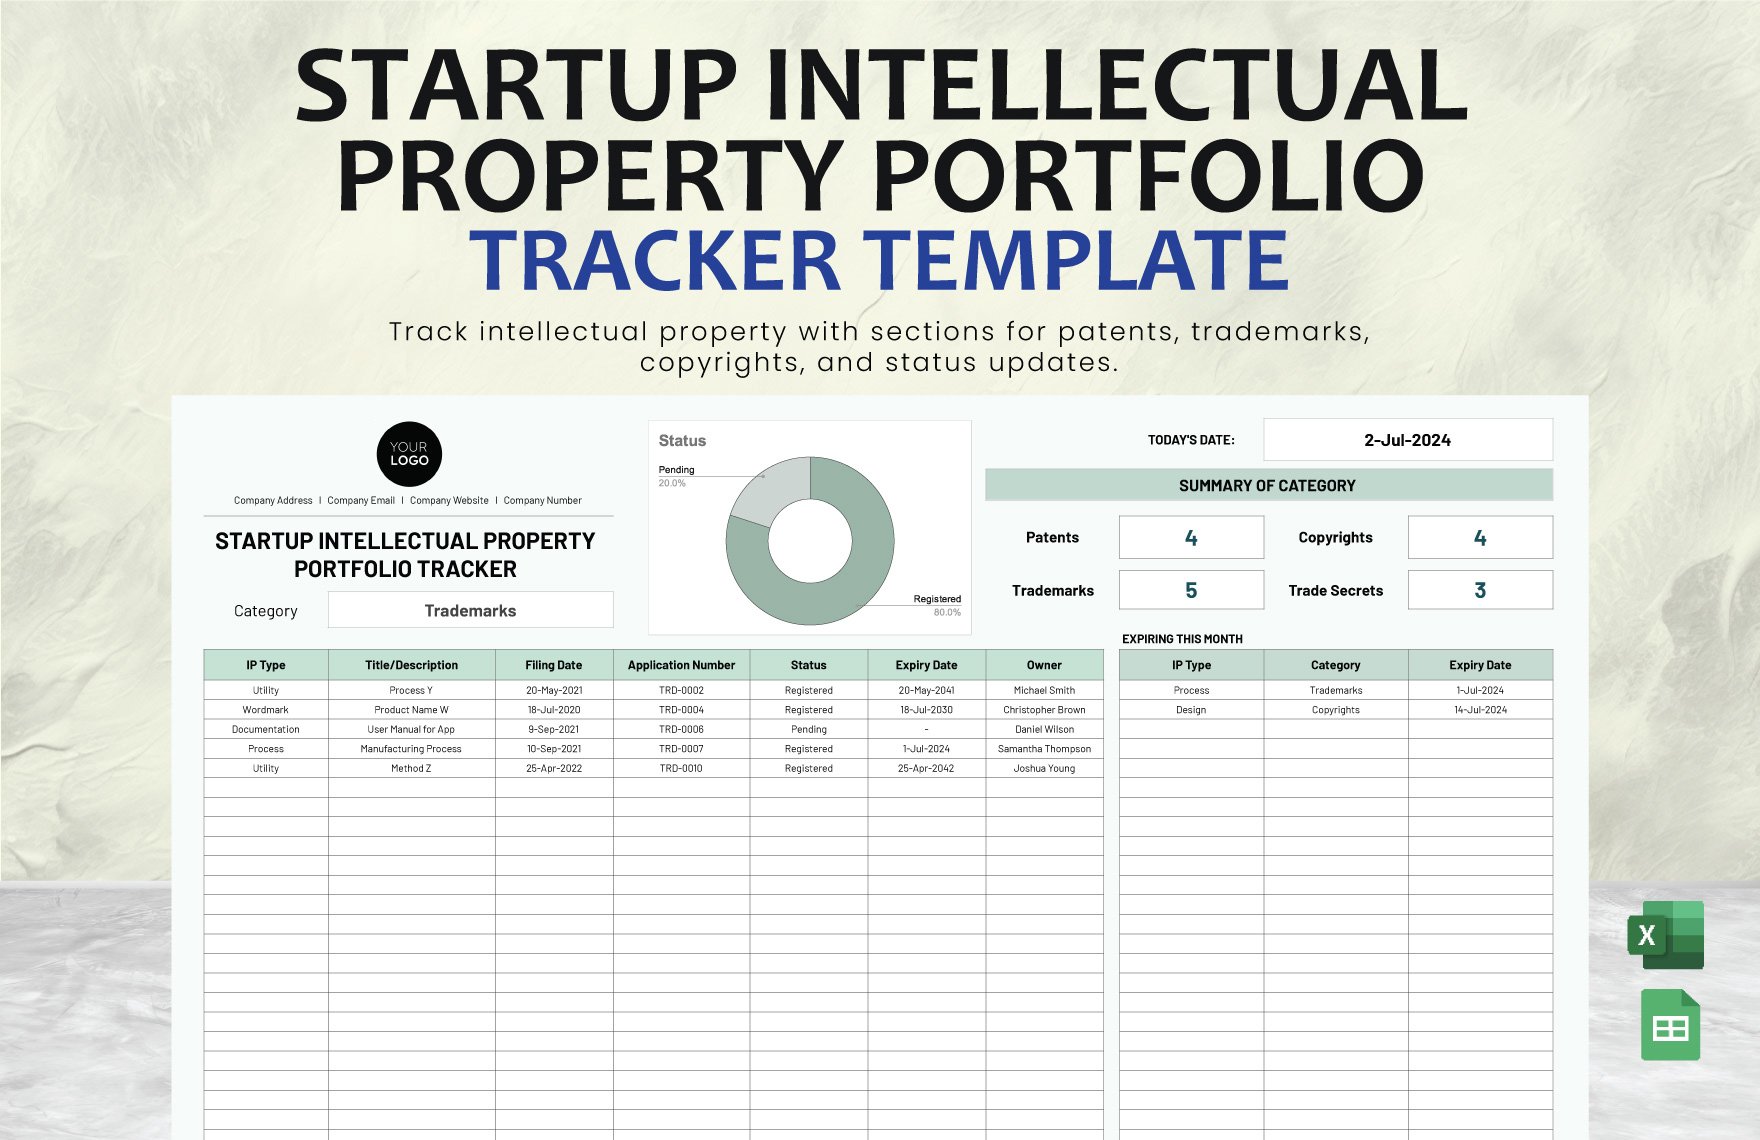 Startup Intellectual Property Portfolio Tracker Template in Excel, Google Sheets